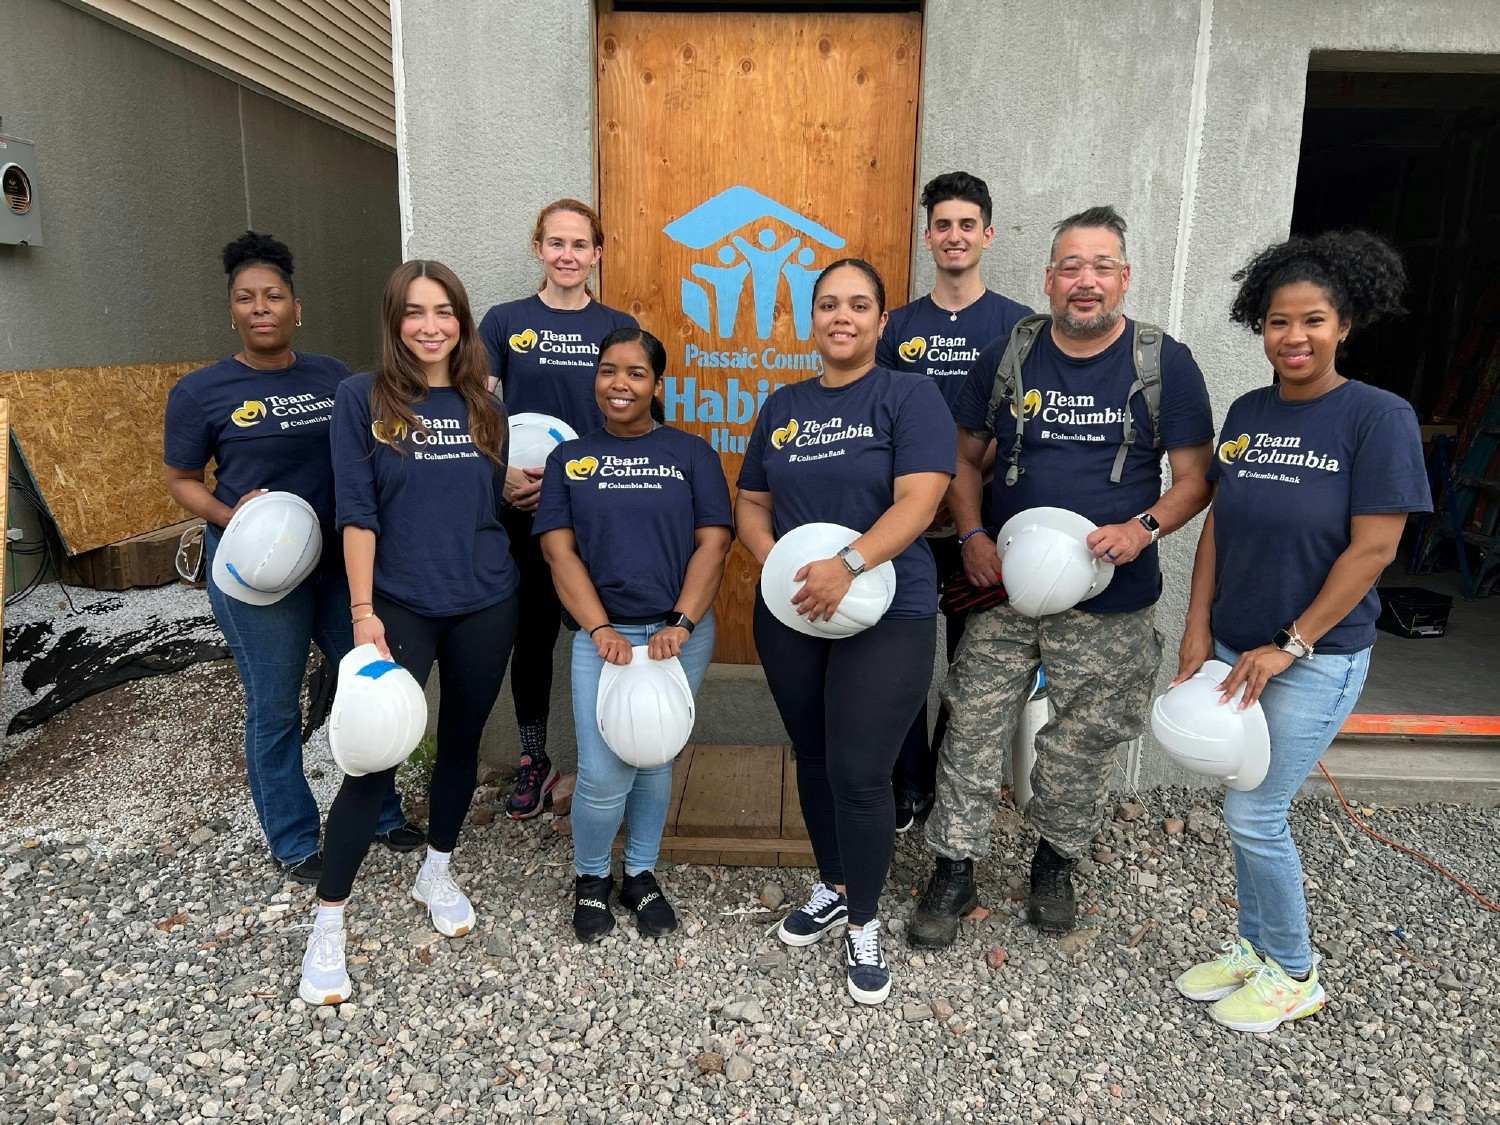 Build Day at Passaic County Habitat for Humanity 